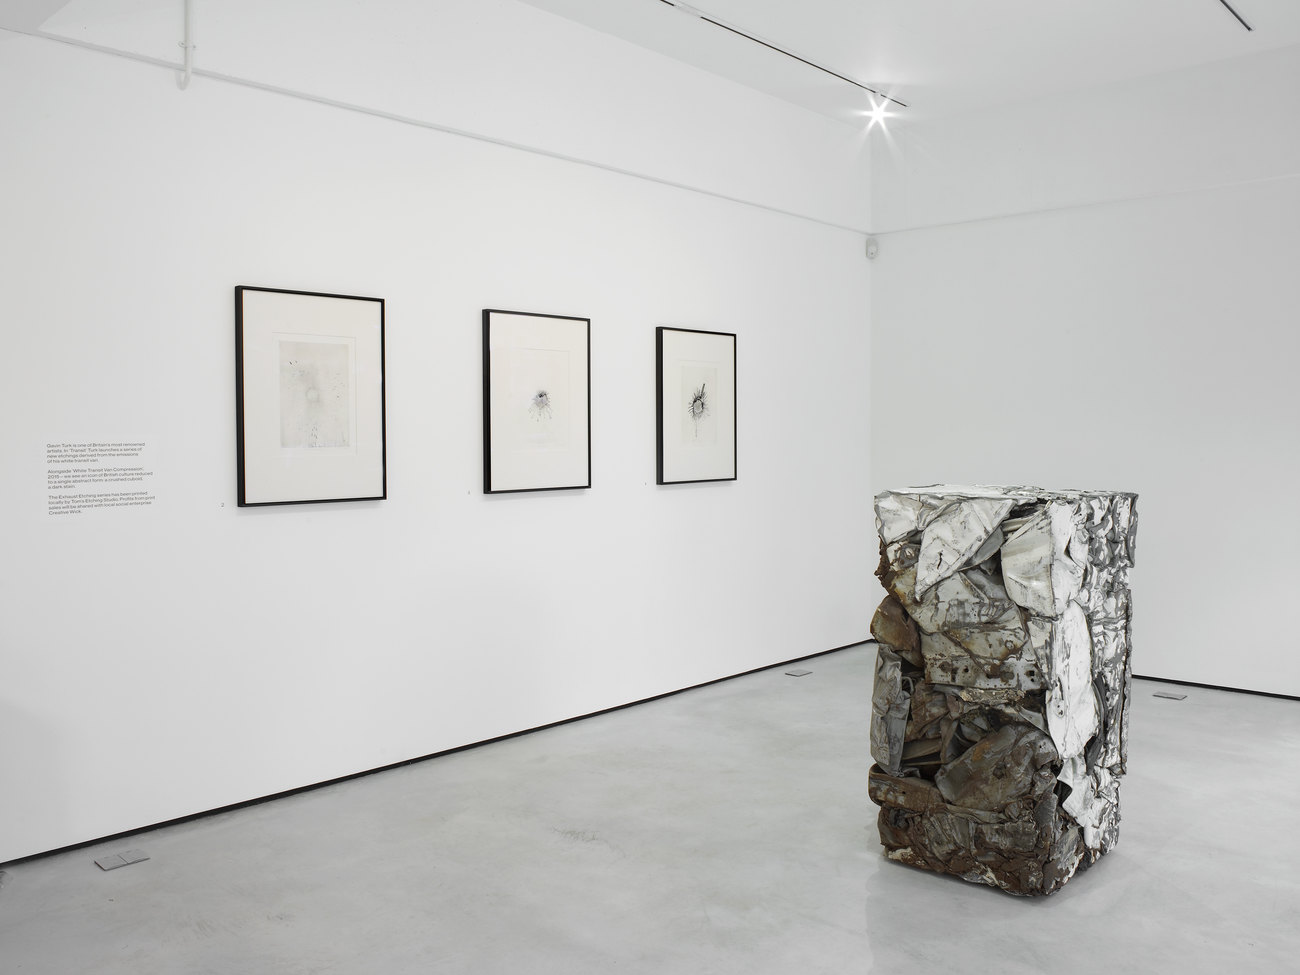 A white room with three framed etchings on the wall and a white van crushed into a cuboid shape in the middle of the room